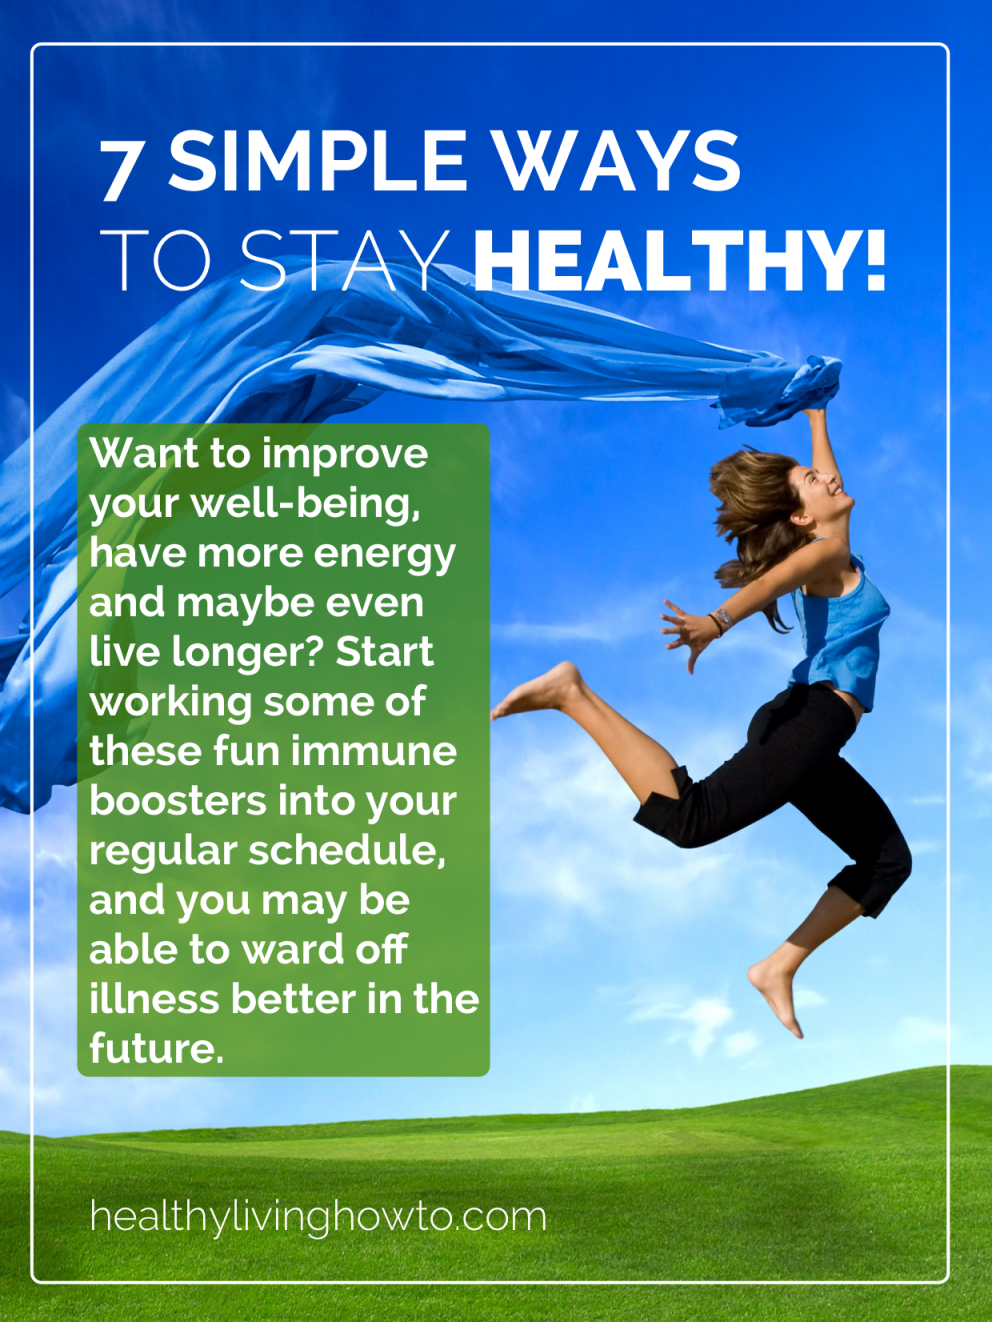 What to do to stay healthy. Tips to stay healthy. Healthy way of Life. How to be healthy лексика. New ways to life